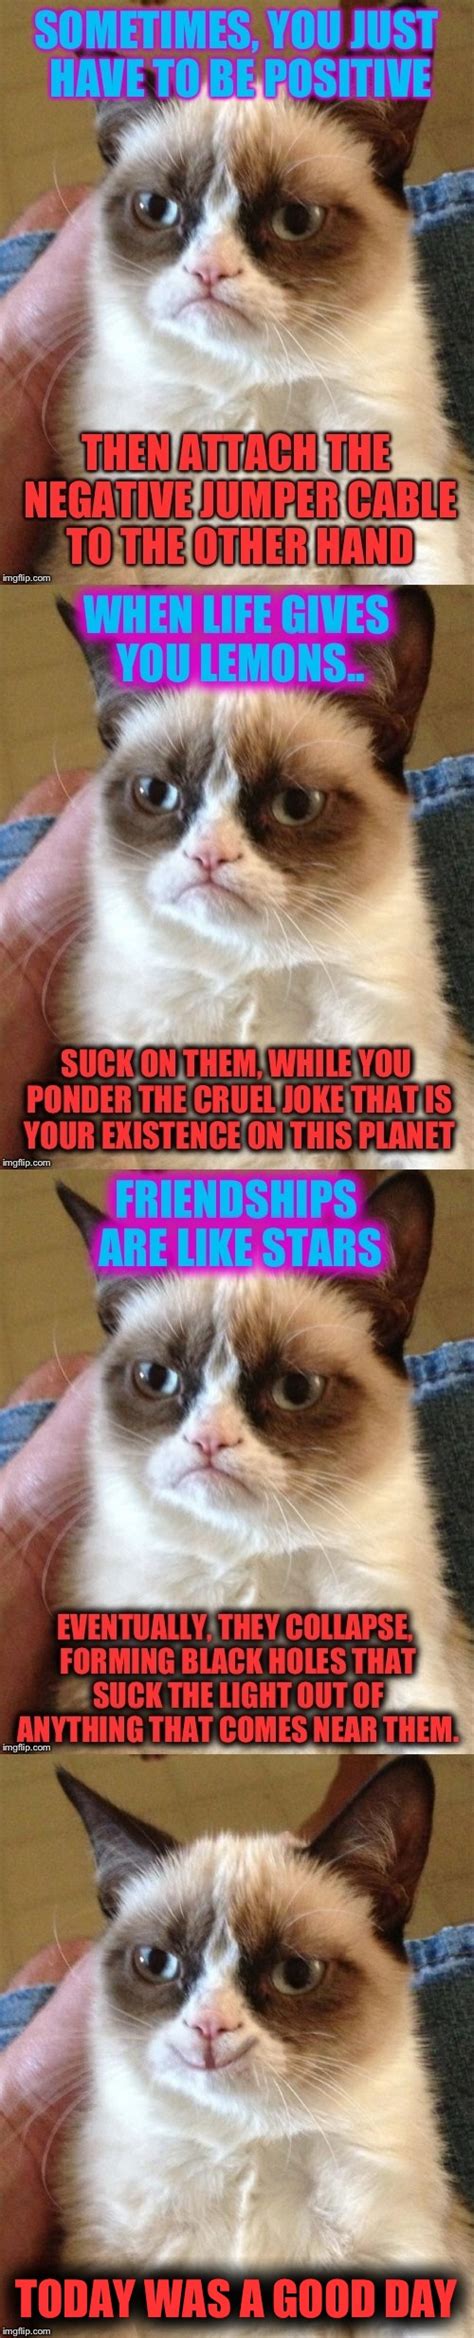 40 funny pictures of cat memes to brighten up your da